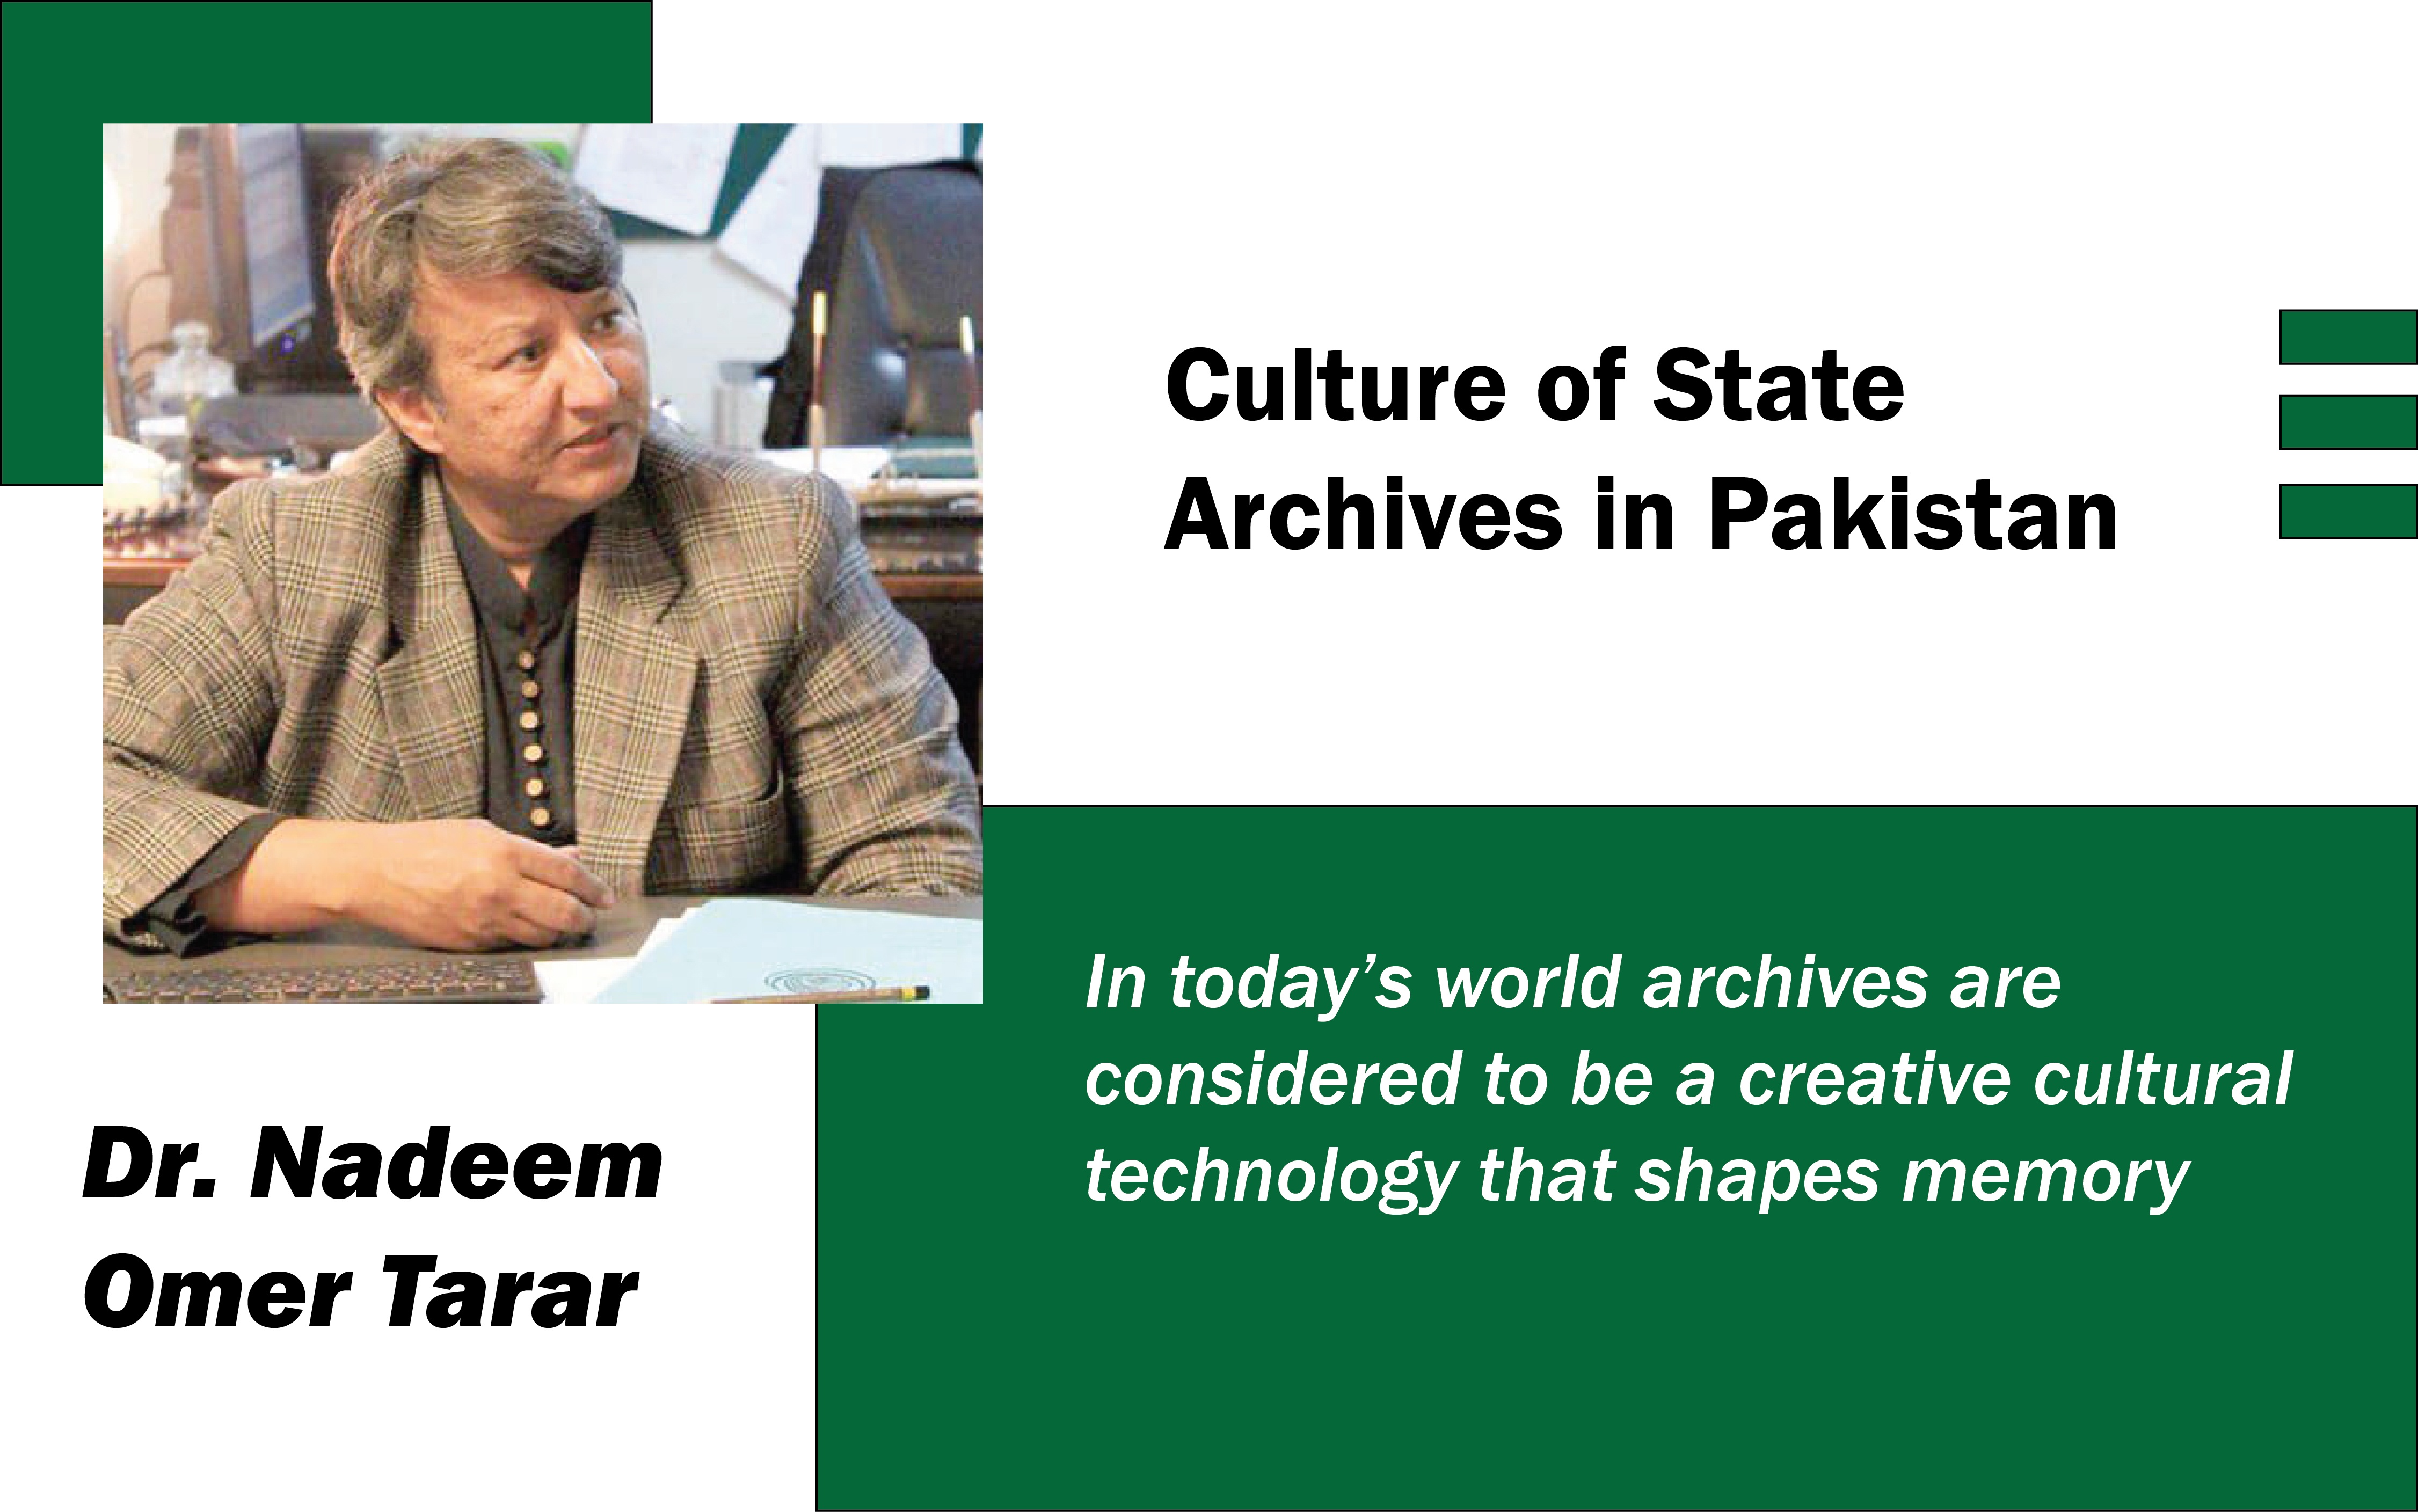 Culture of State Archives in Pakistan